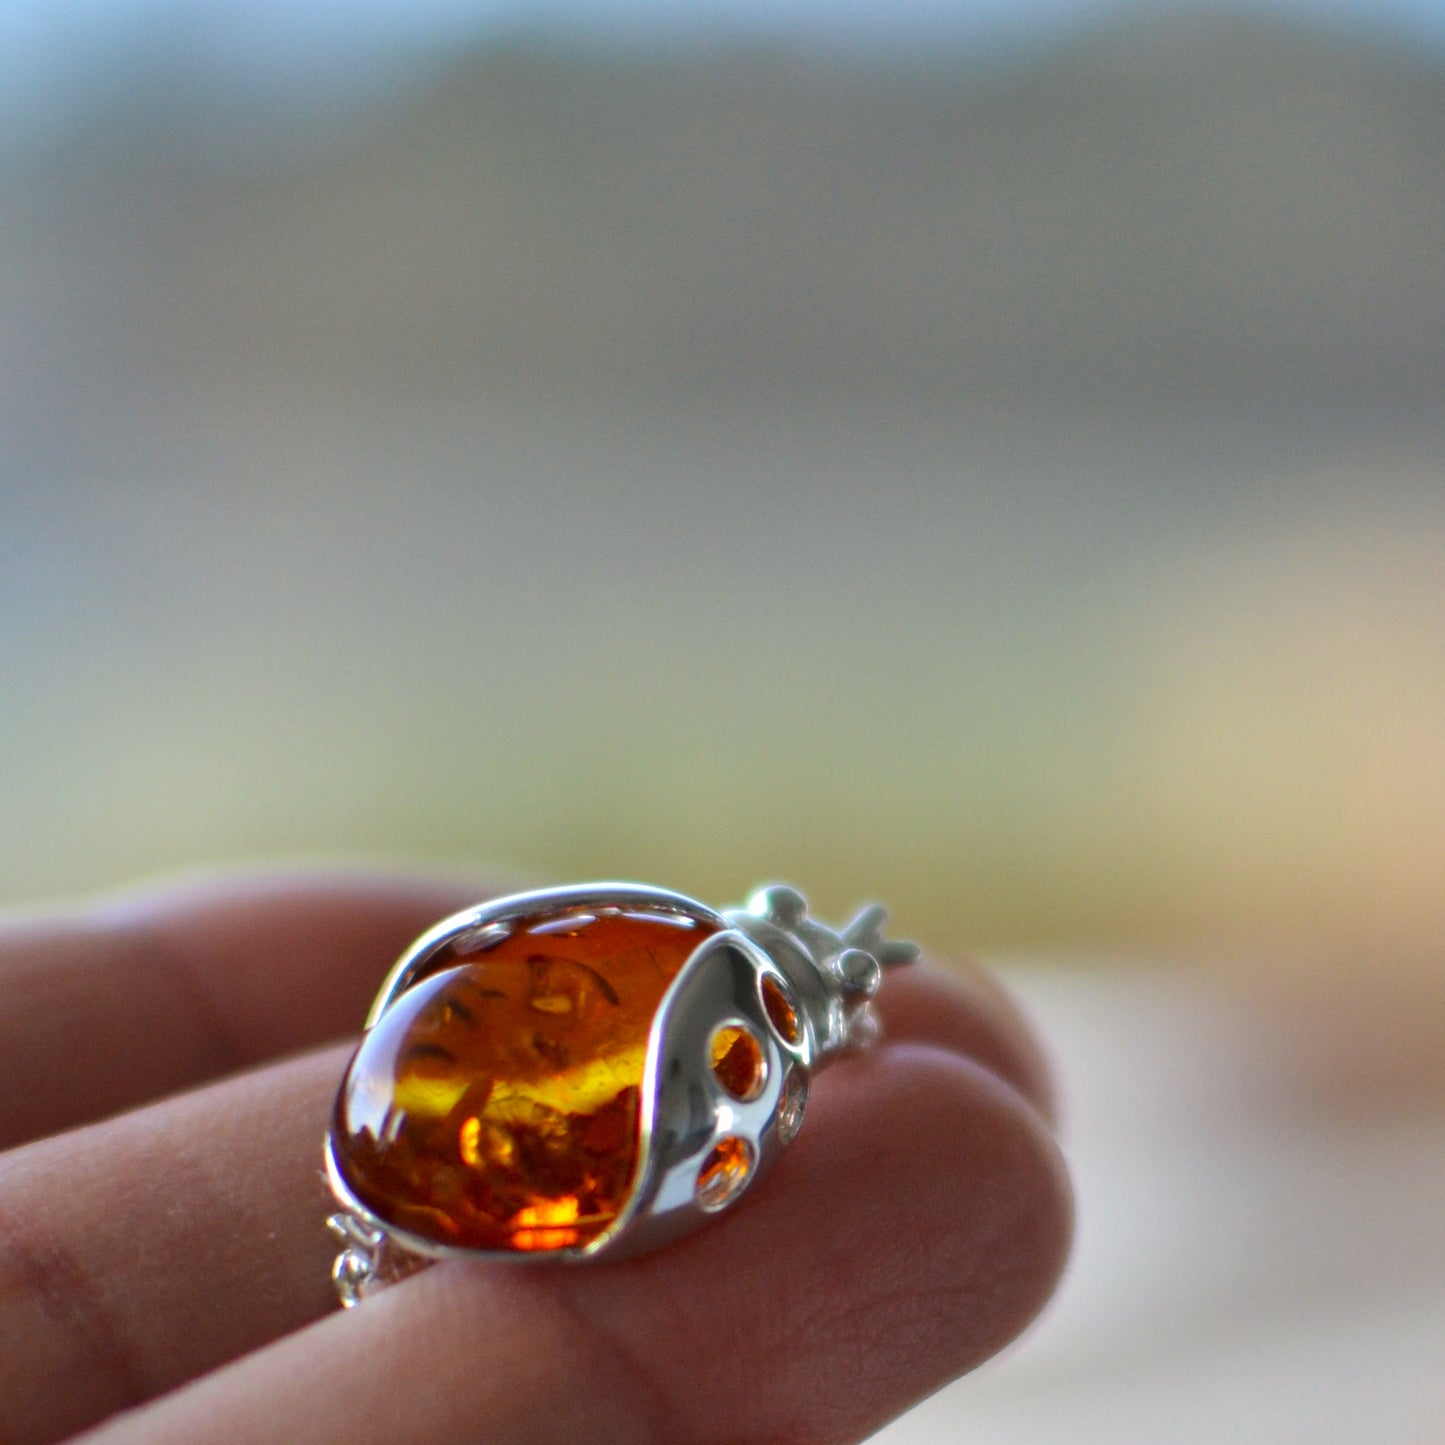 Ladybug Sterling Silver Brooch with Amber